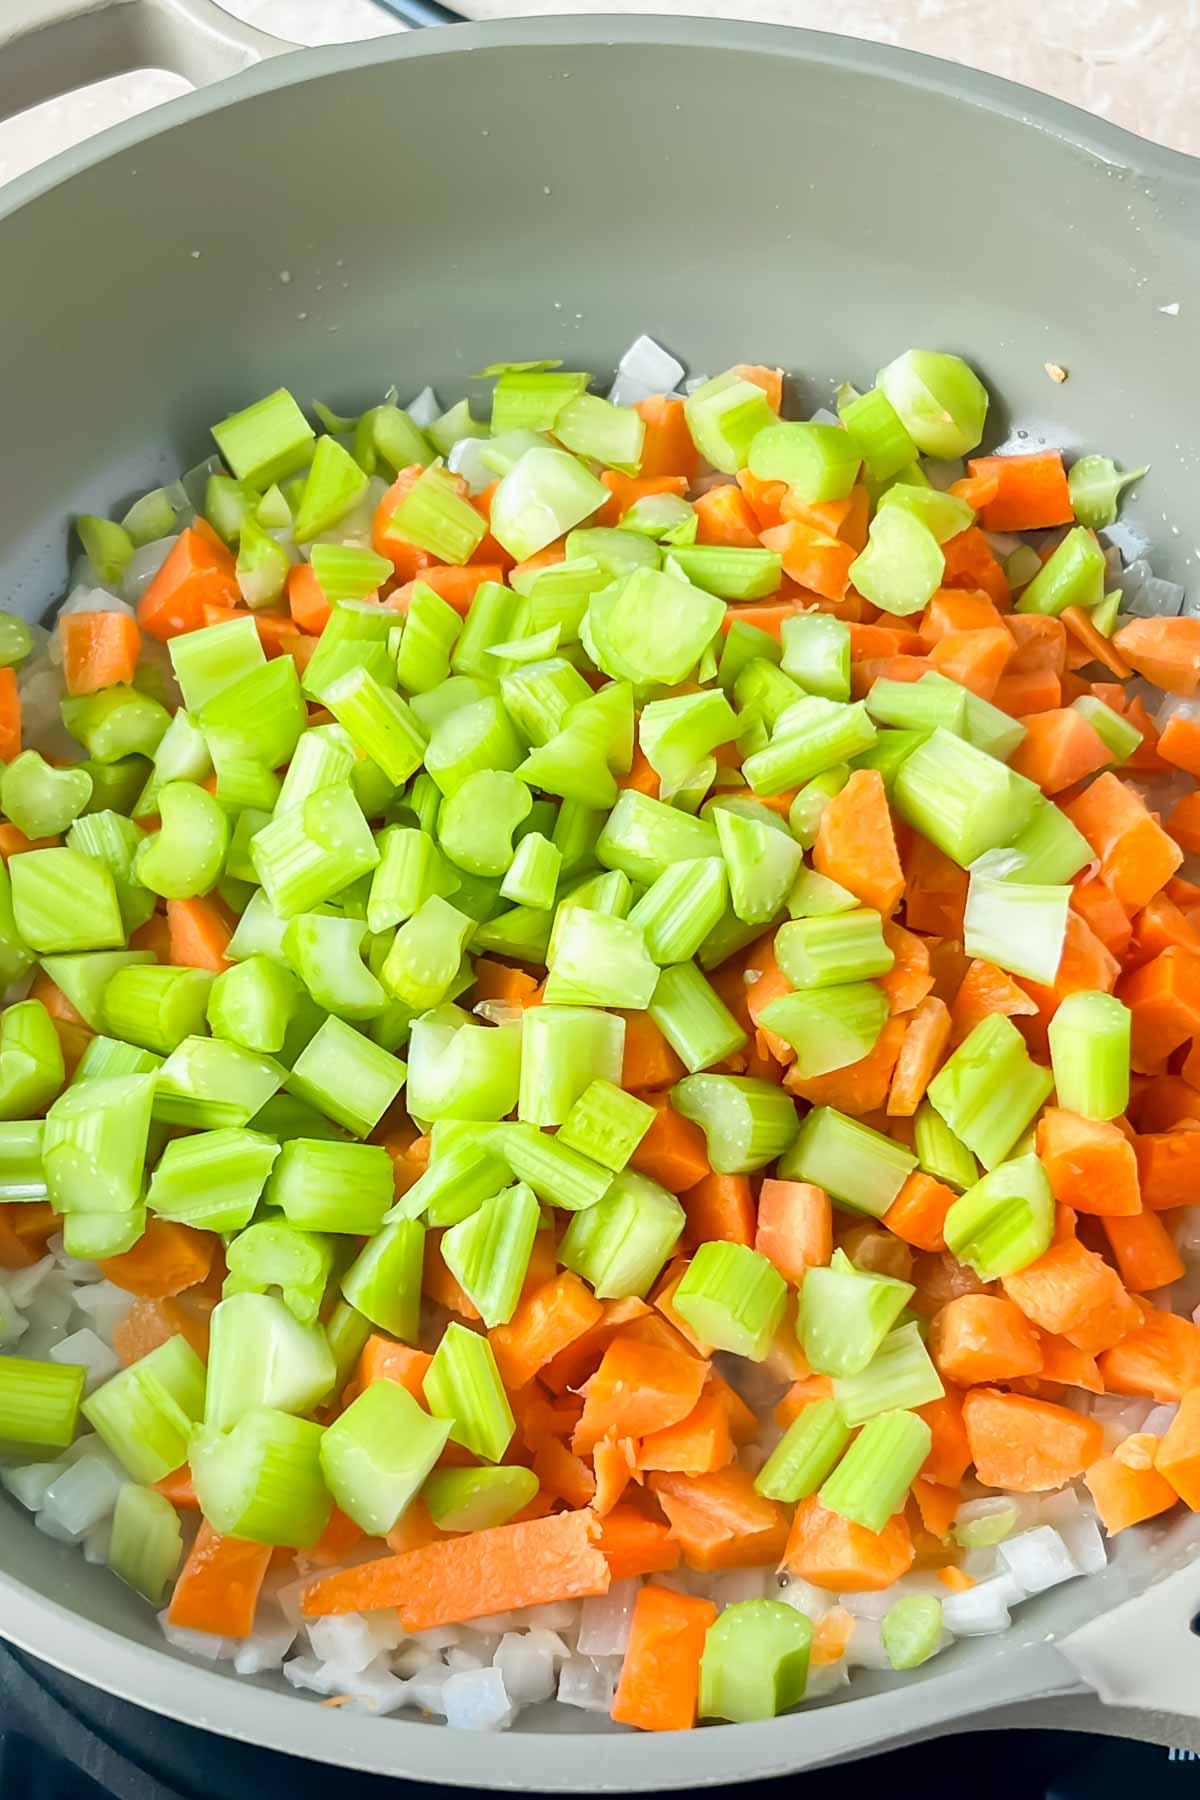 onions, carrots, and celery in gray skillet.